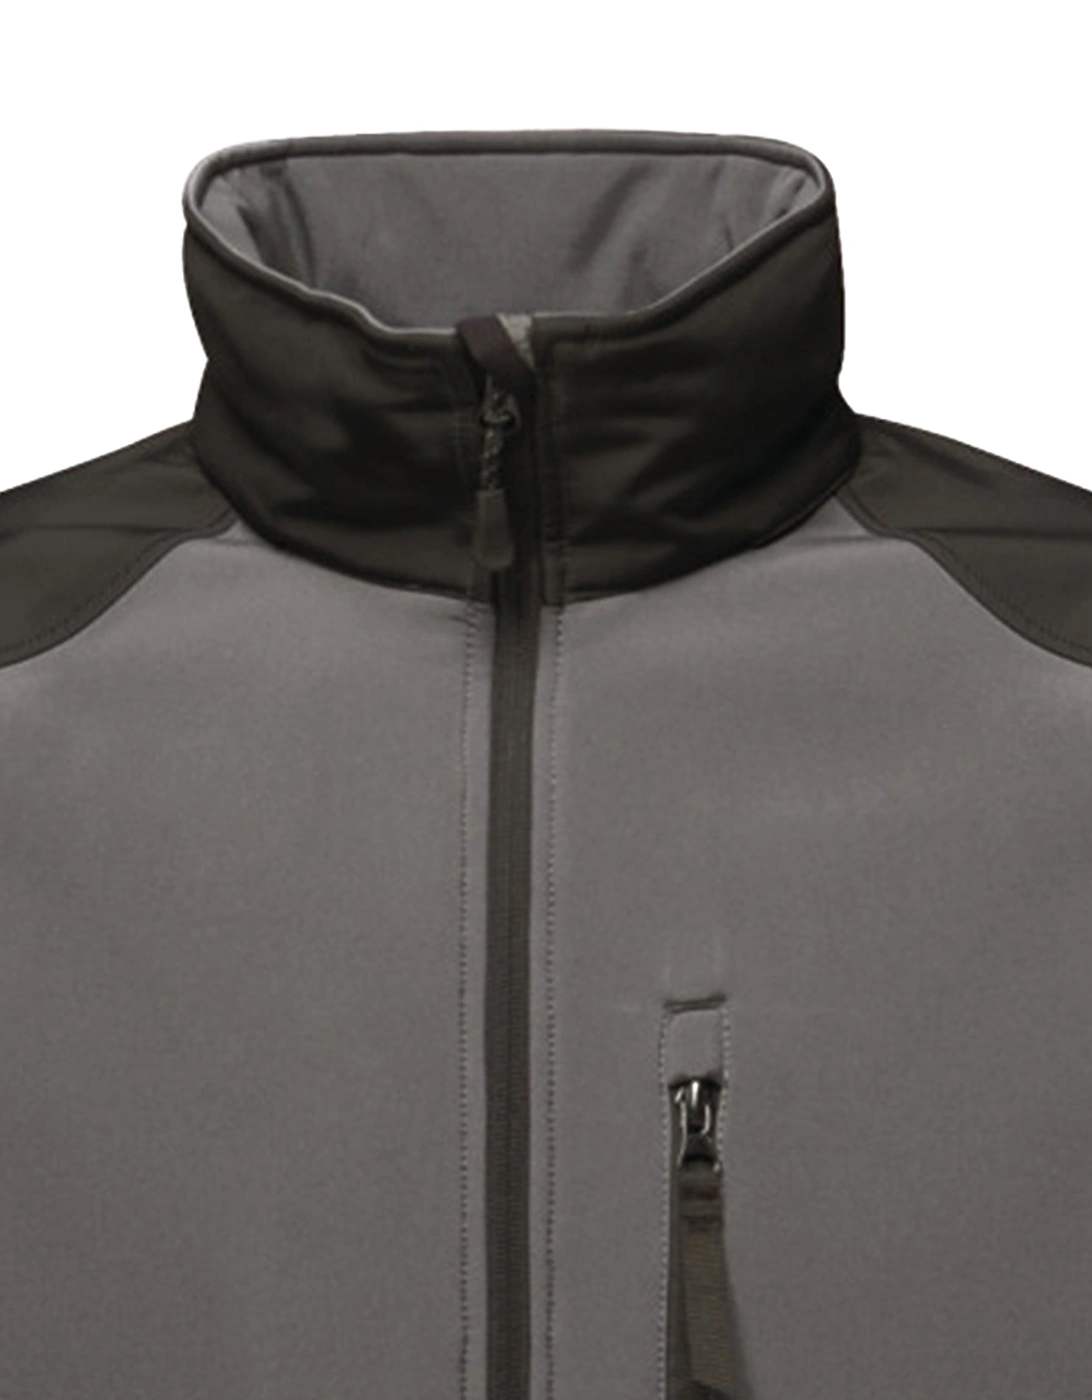 Mens Hydroforce 3-layer Membrane Waterproof Breathable Softshell Jackets